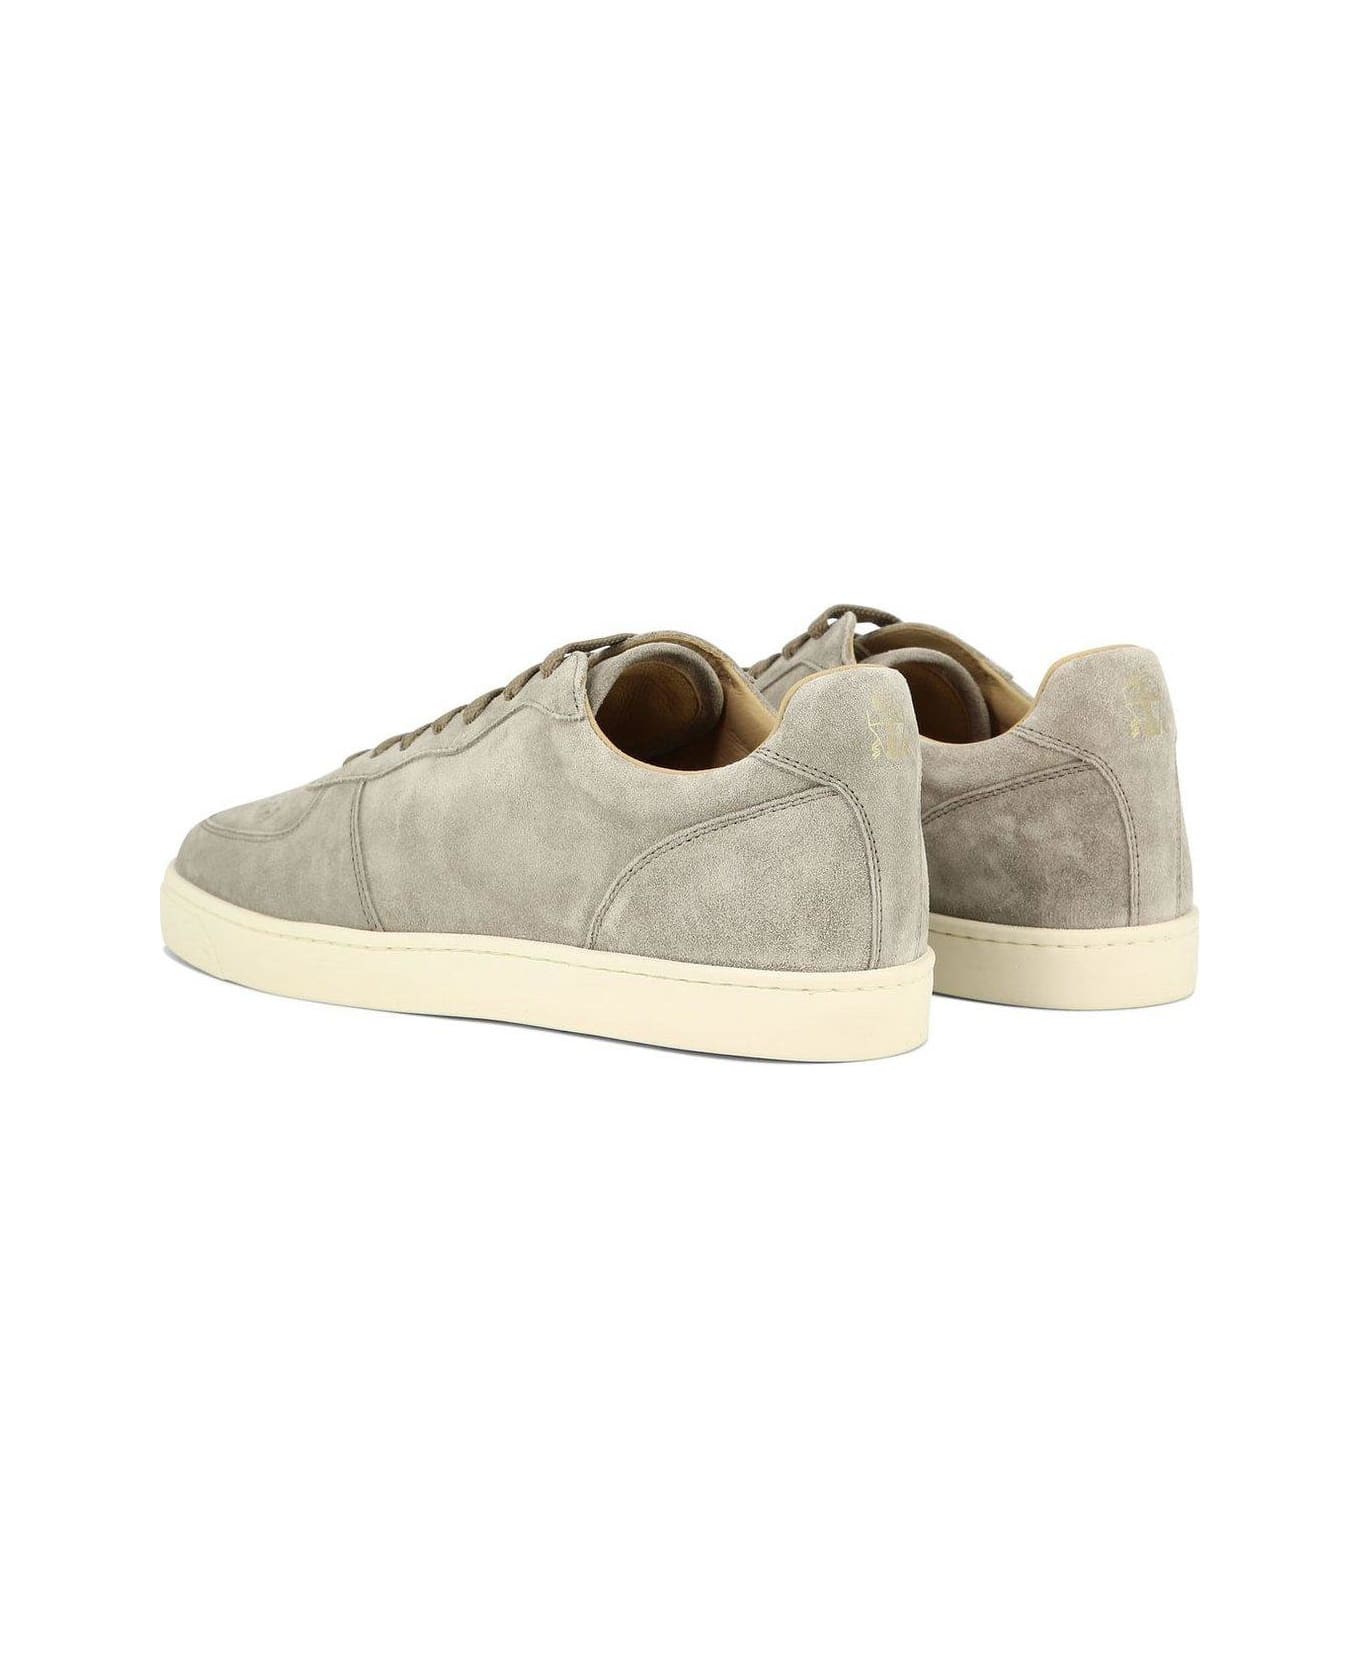 Brunello Cucinelli Round-toe Lace-up Sneakers - Beige